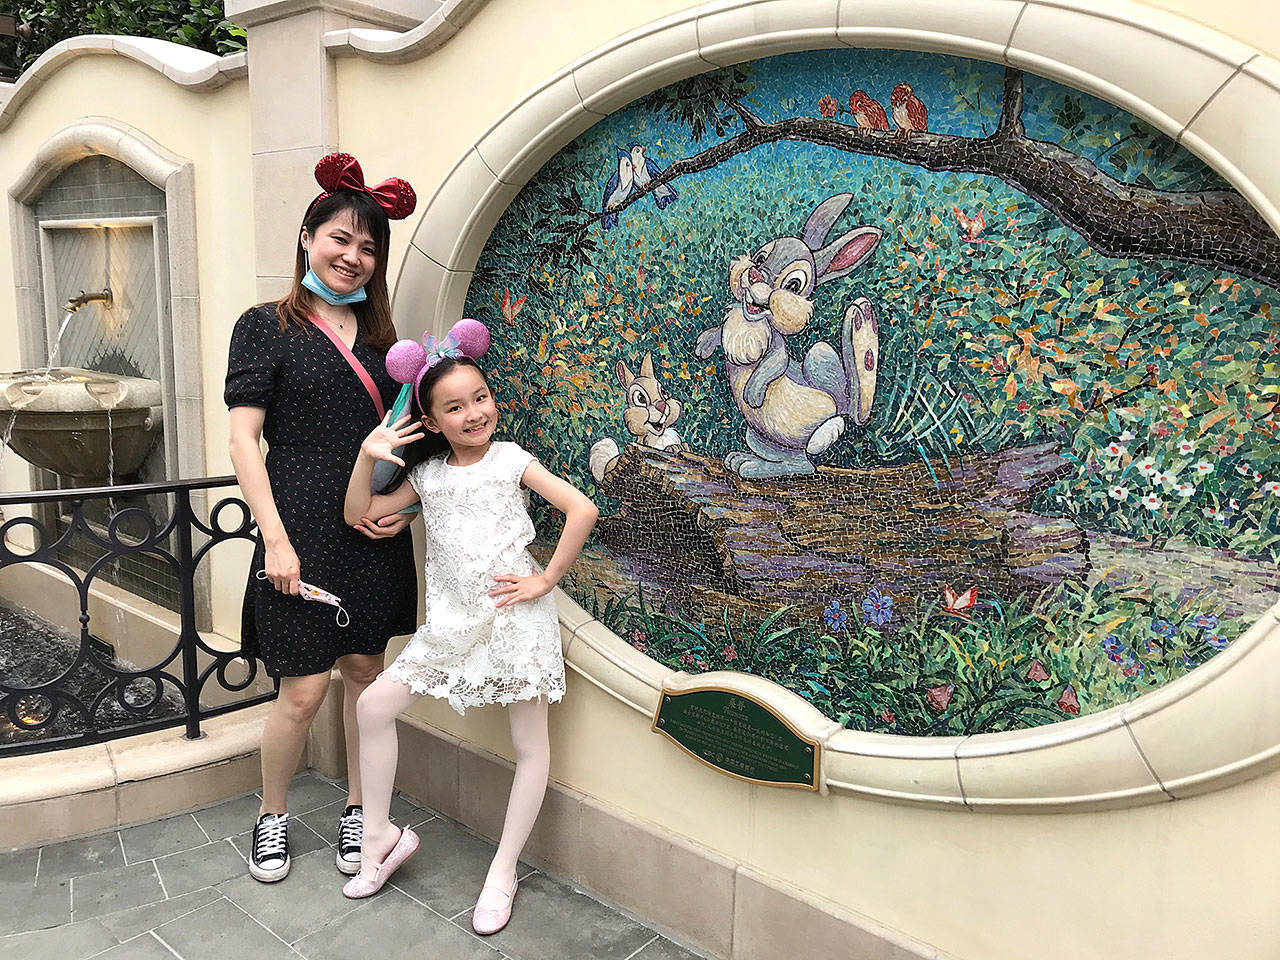 Liu Jiali, 39, and her daughter Margaret Liu, 8, were on a Disneyland trip before Margaret’s long-awaited return to second grade. (Alice Su/Los Angeles Times)